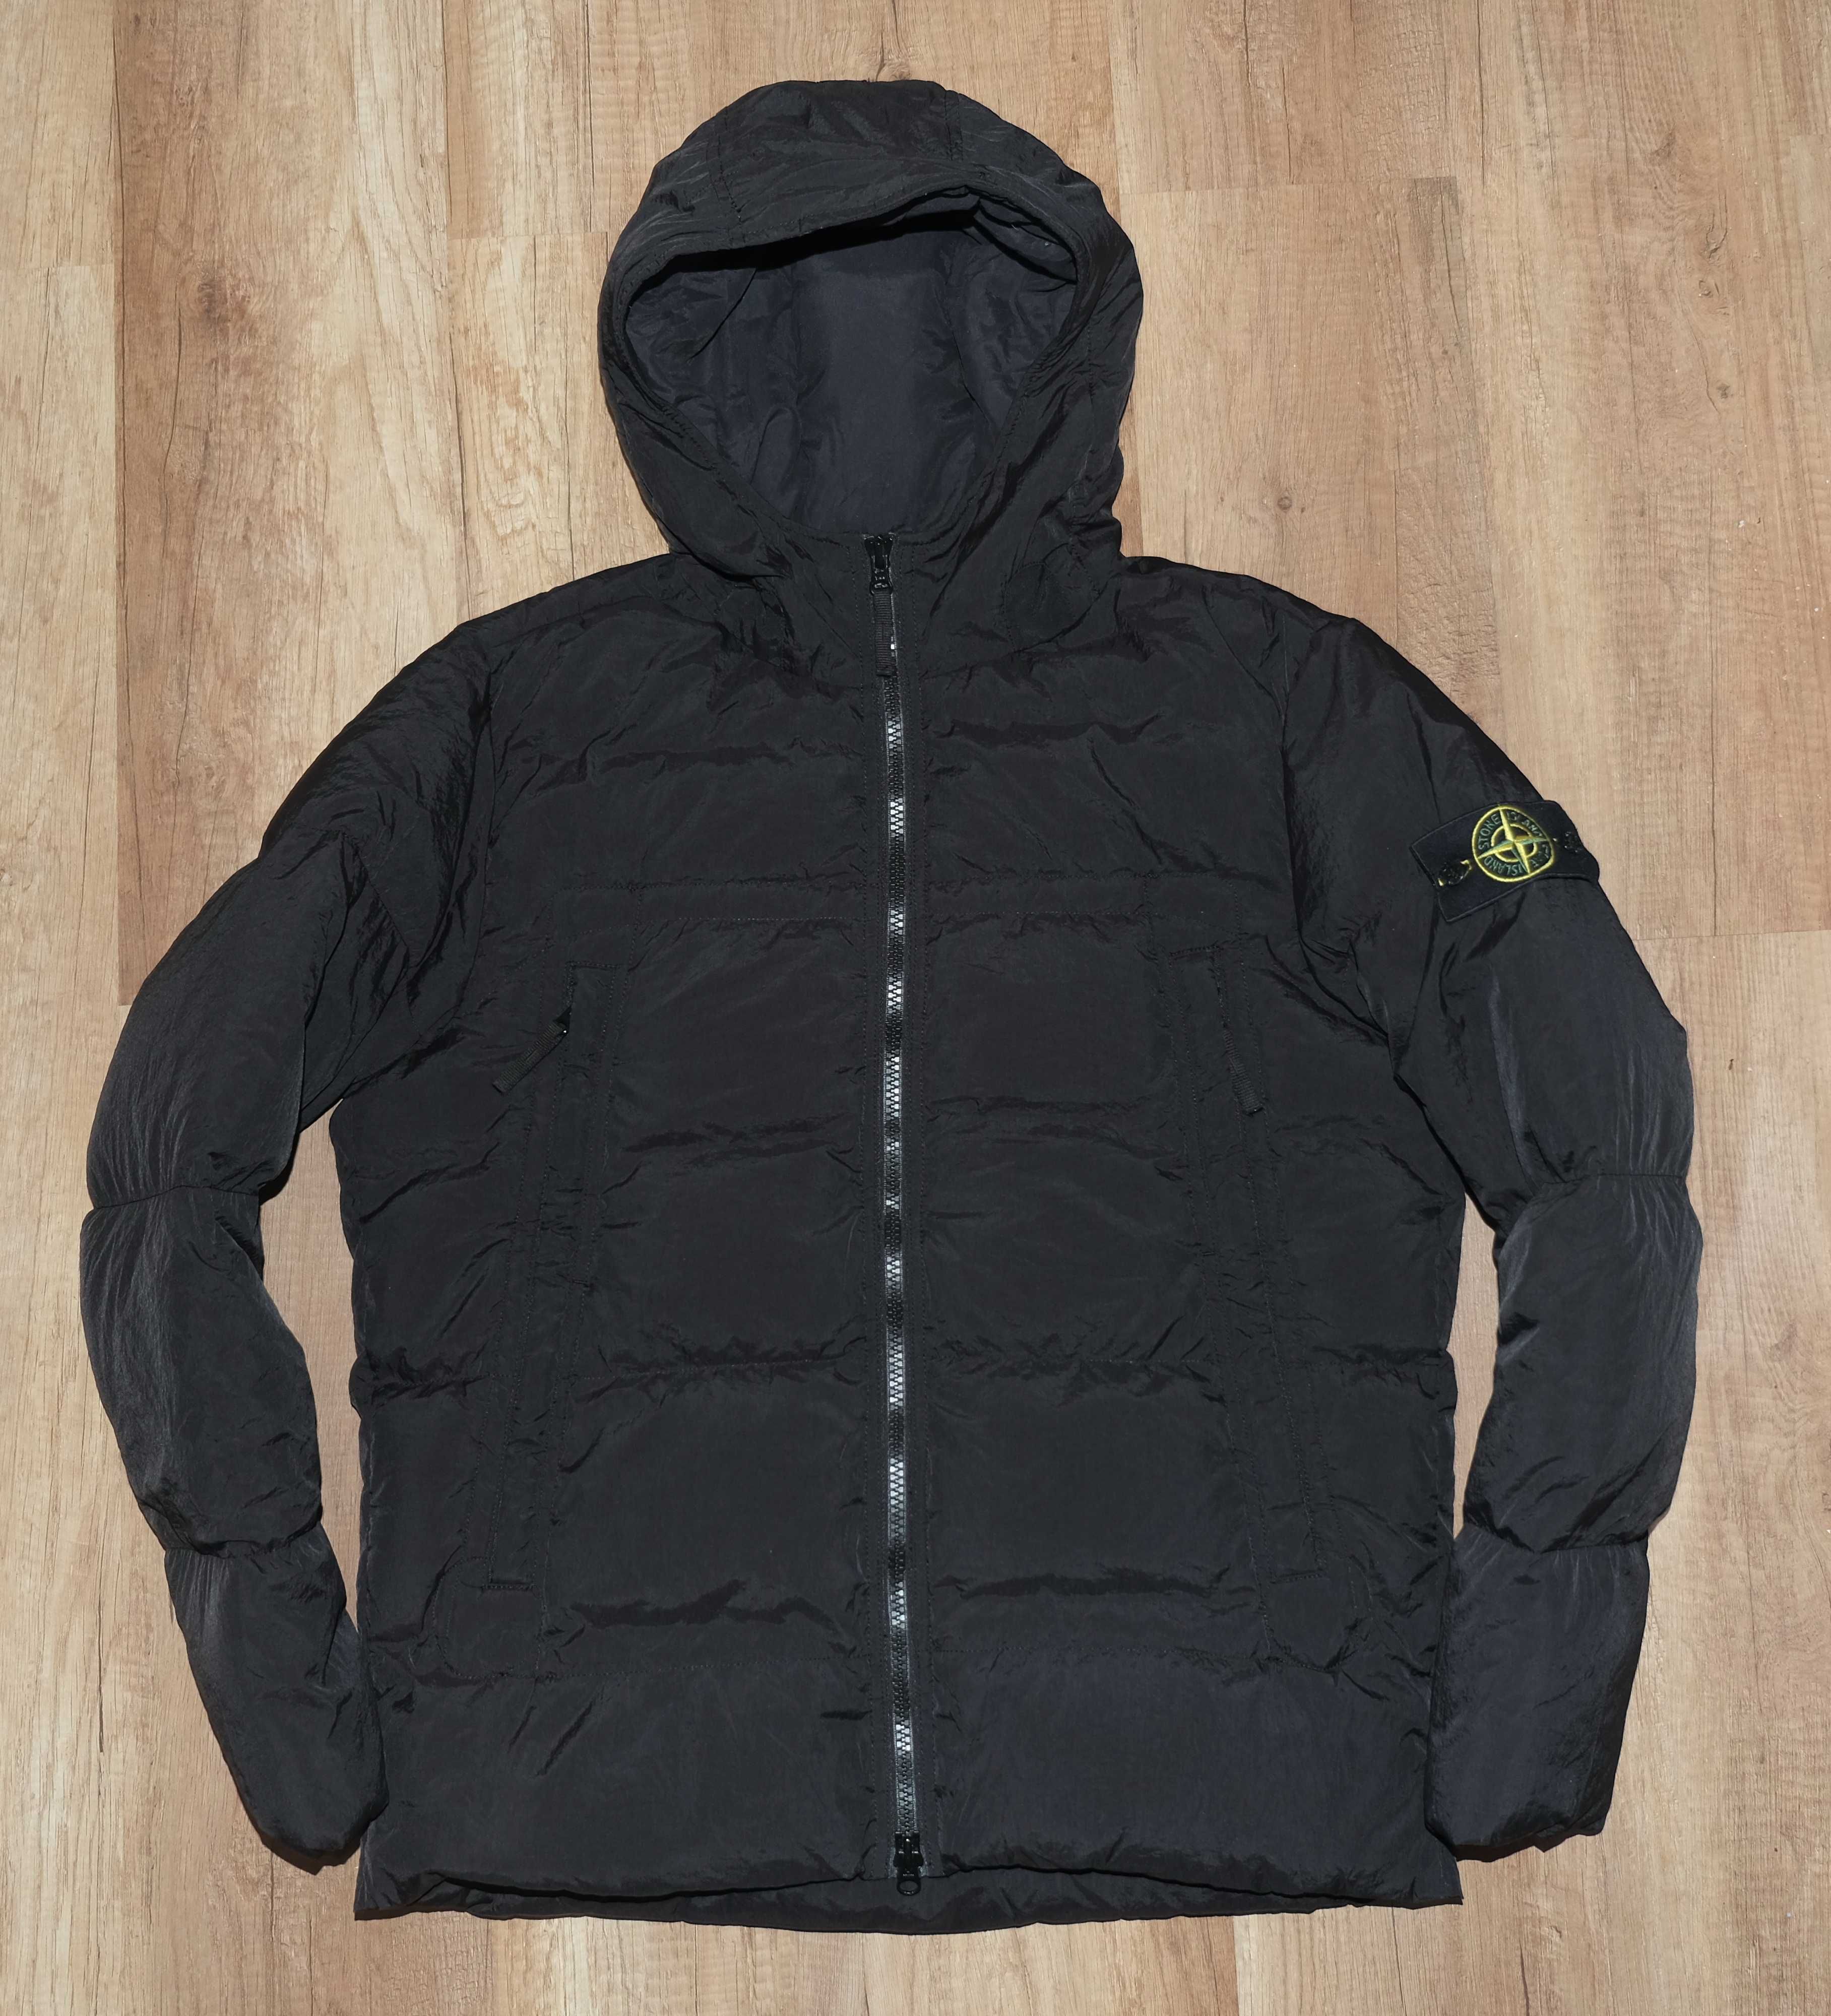 Stone Island Garment Dyed Crinkle Reps NY Down Jacket